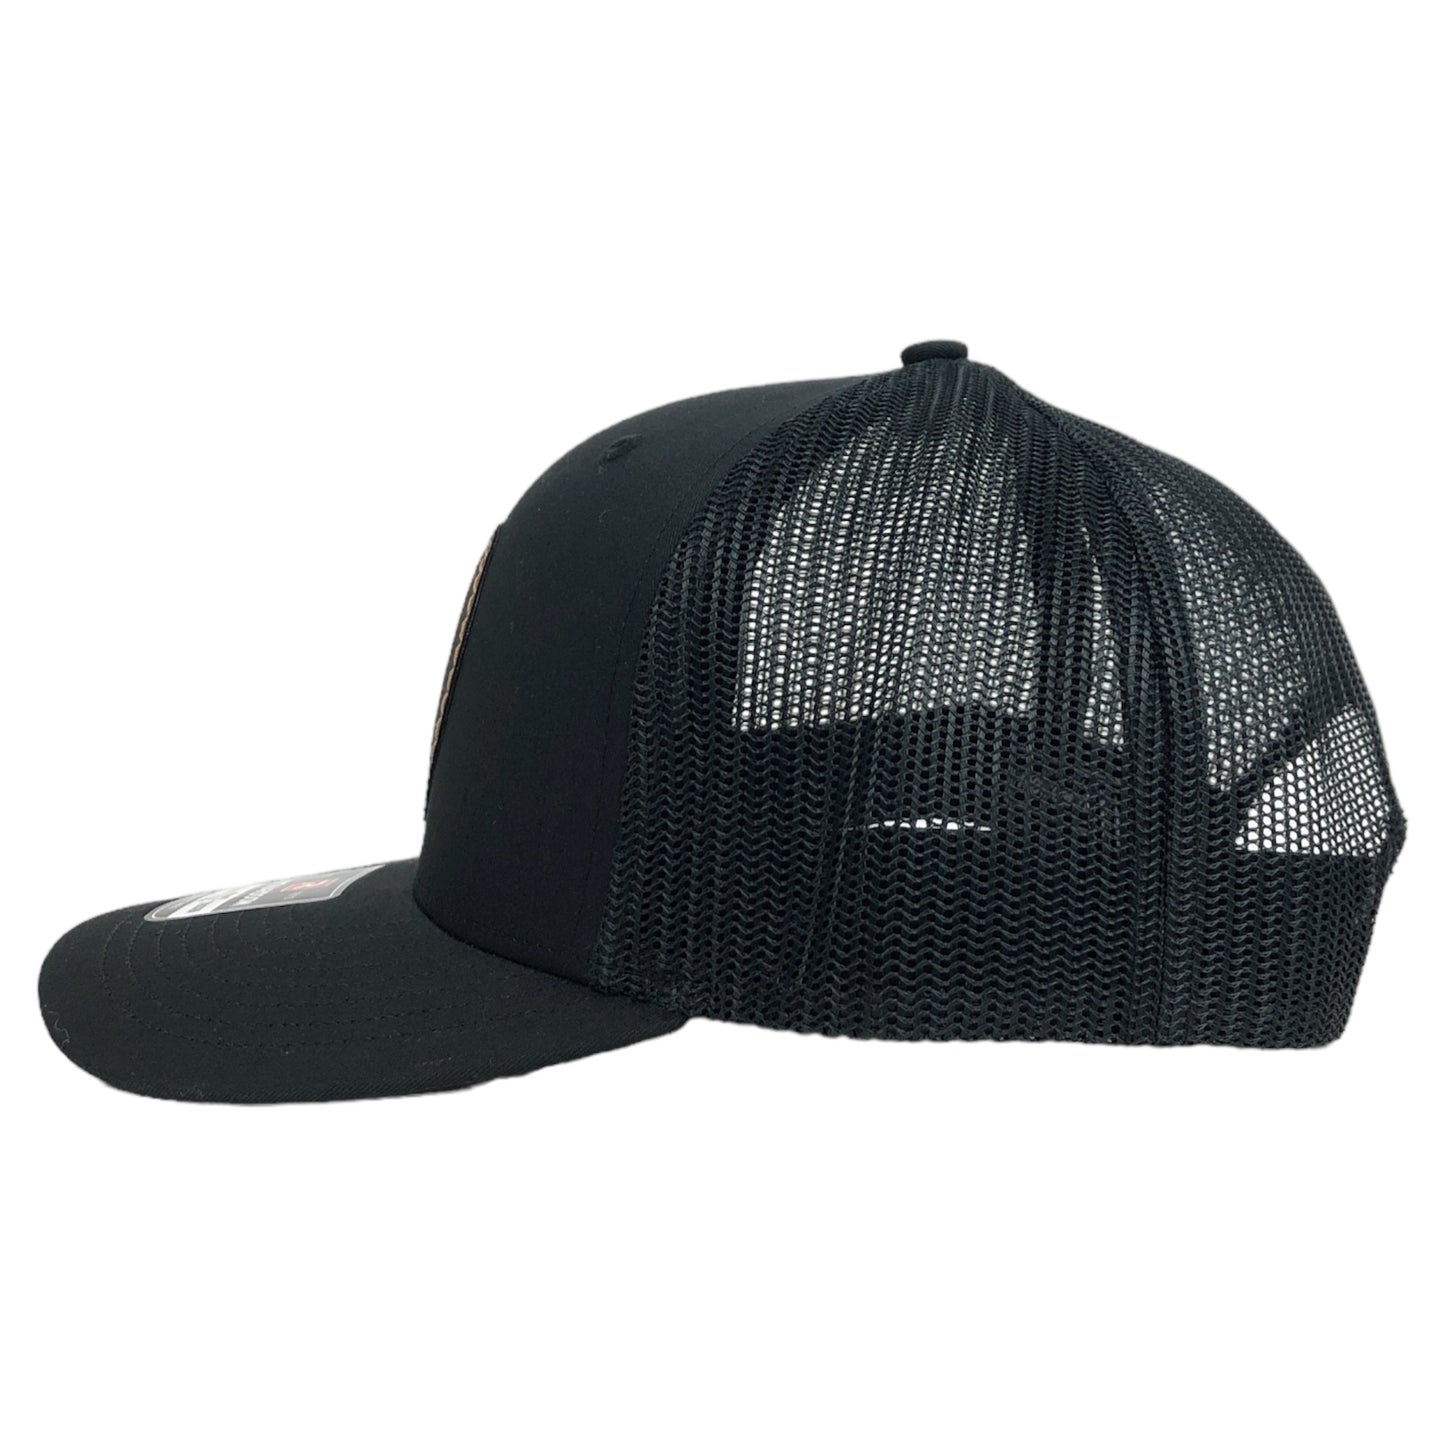 Left side of the DubSea Fish Sticks all black, leather patch, adjustable trucker hat.